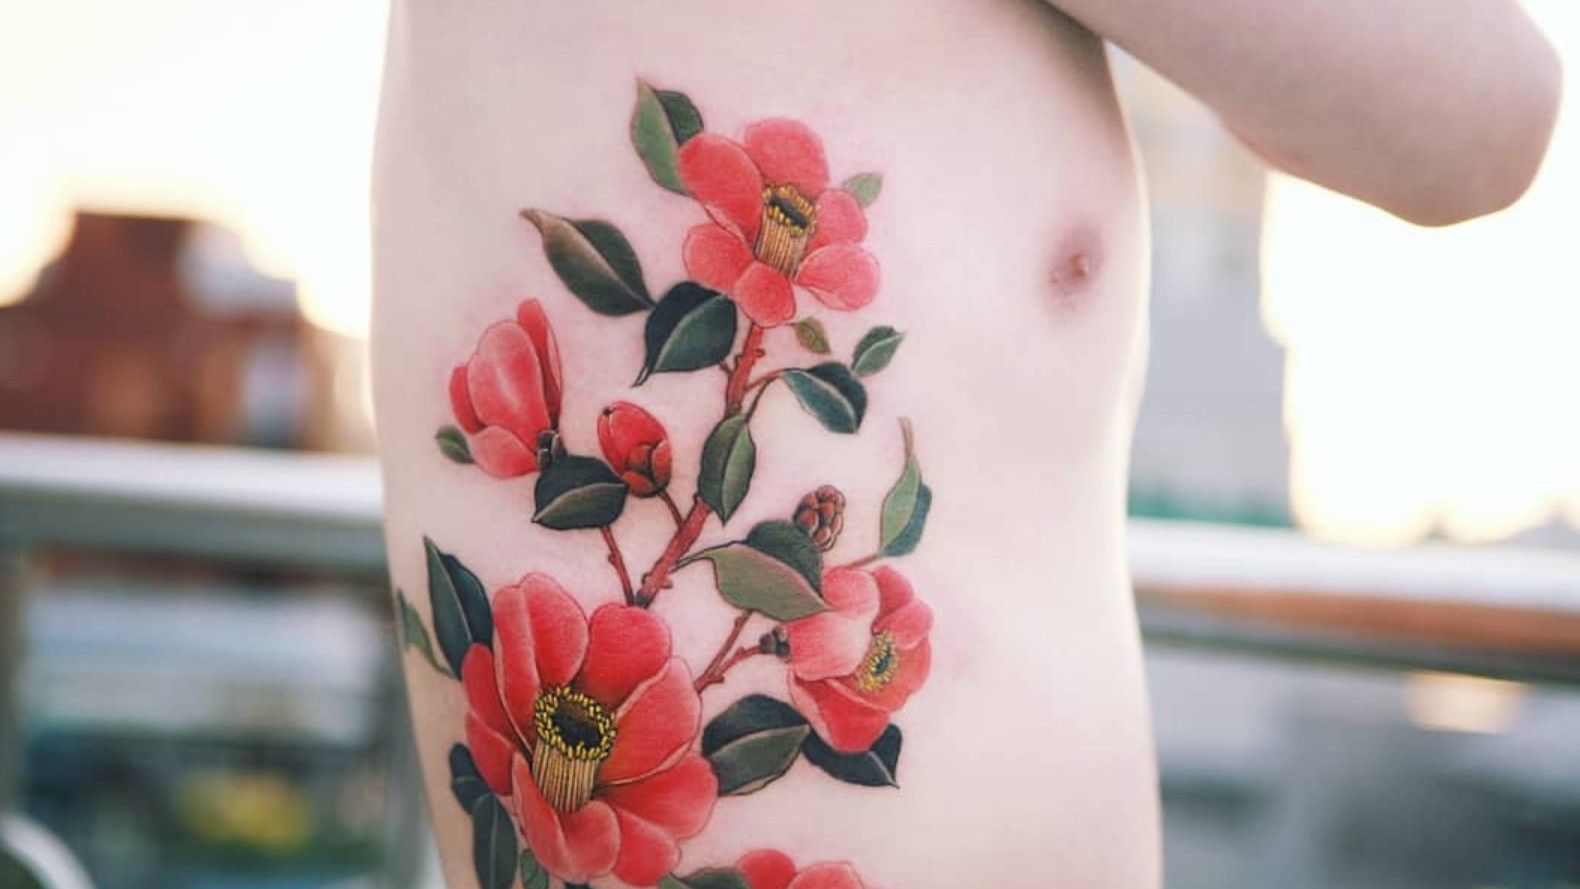  35 Best Camellia Flower Tattoo Designs  Meaning and Ideas